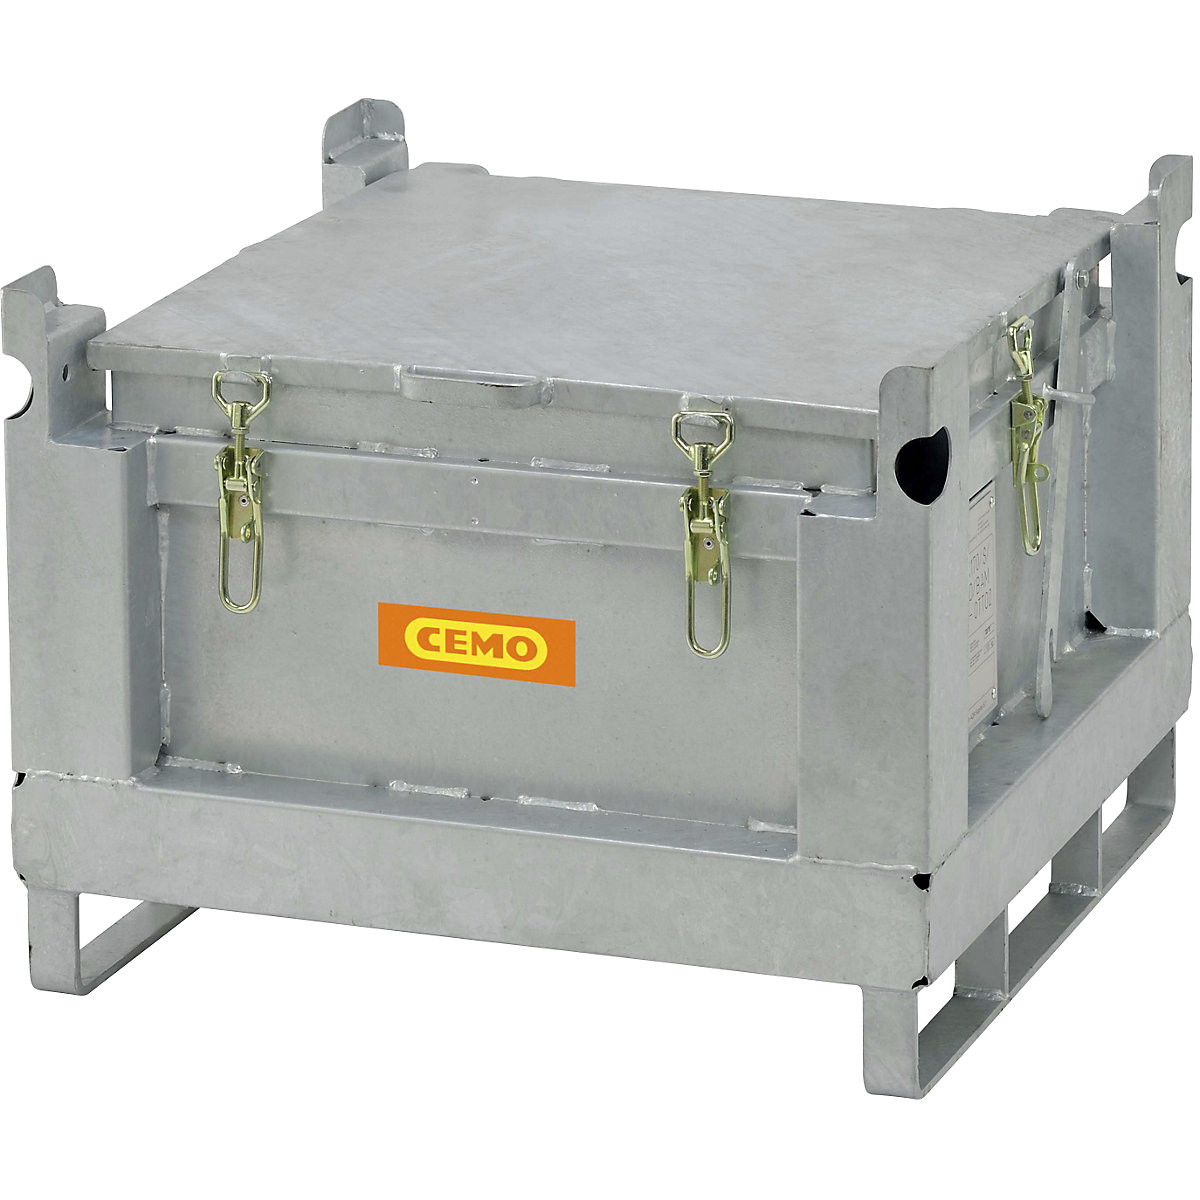 Steel collection and transport container for rechargeable batteries – CEMO